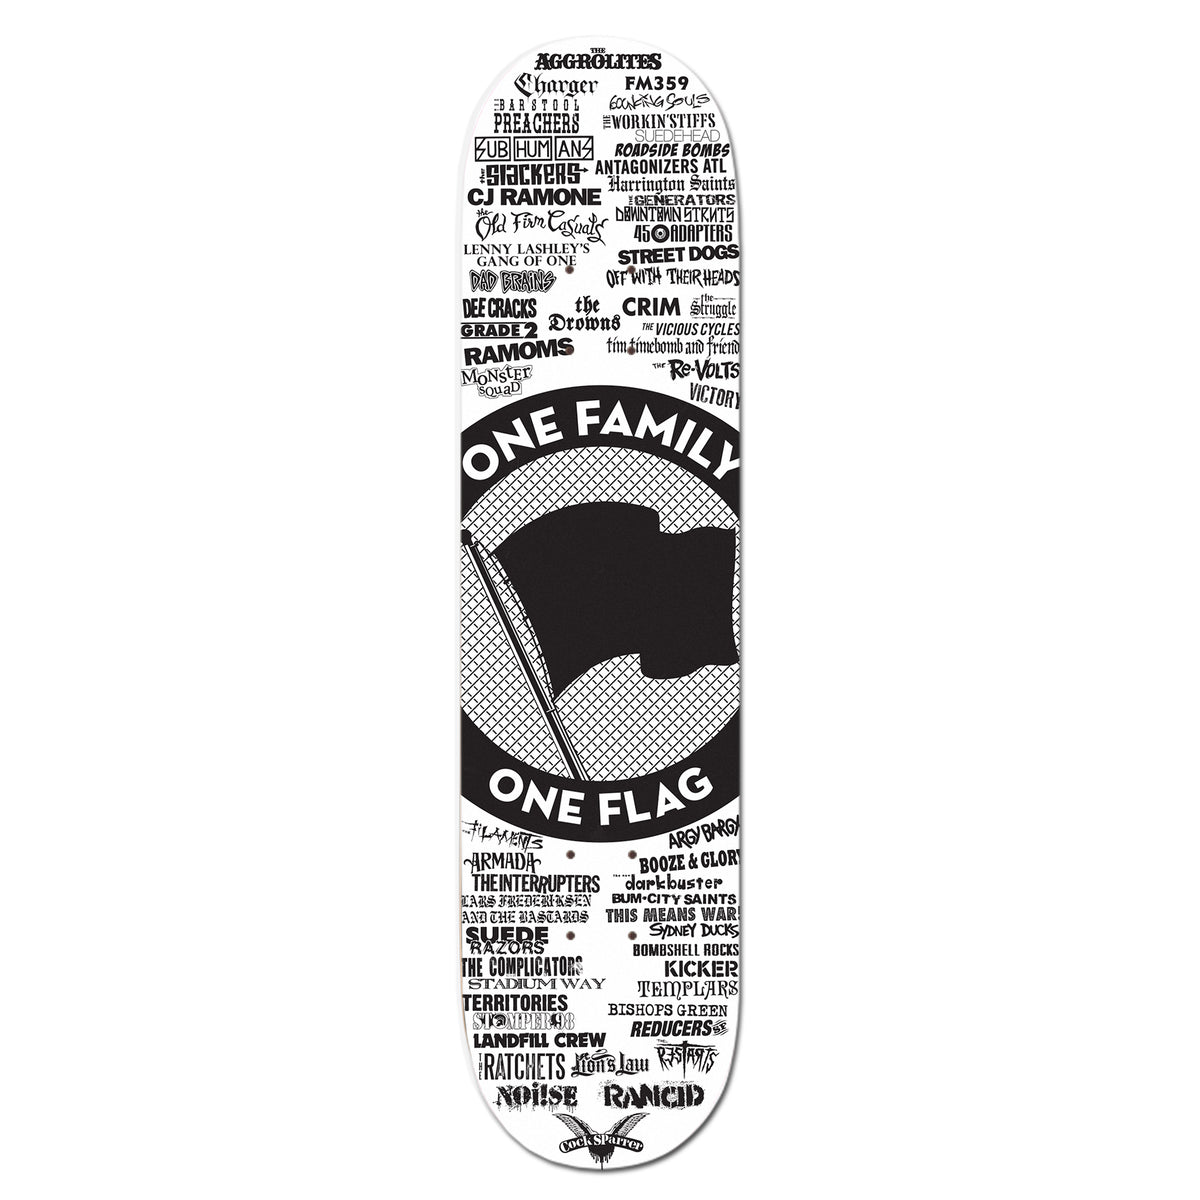 Pirates Press Records - One Family One Flag - Skateboard Deck